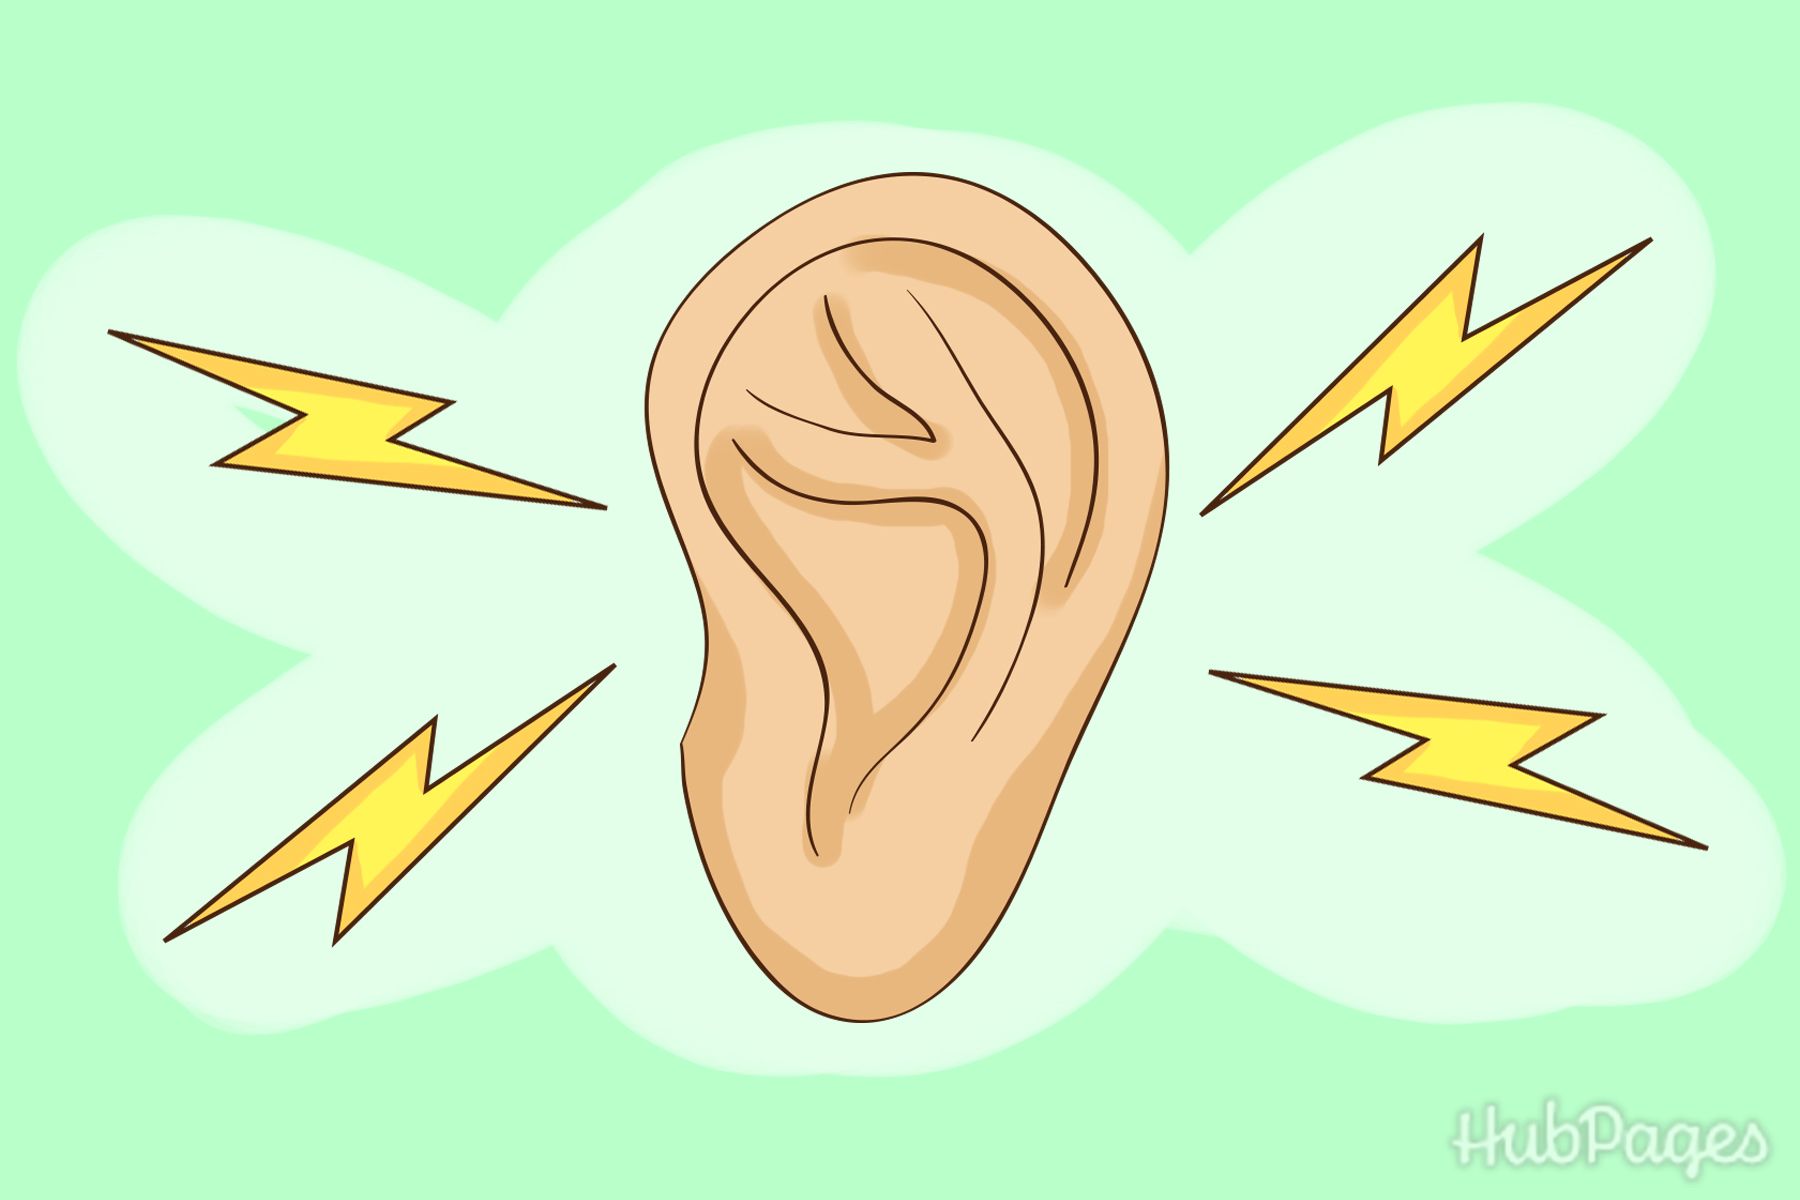 Sweet Oil and Other Home Remedies for Painful Ear Infections